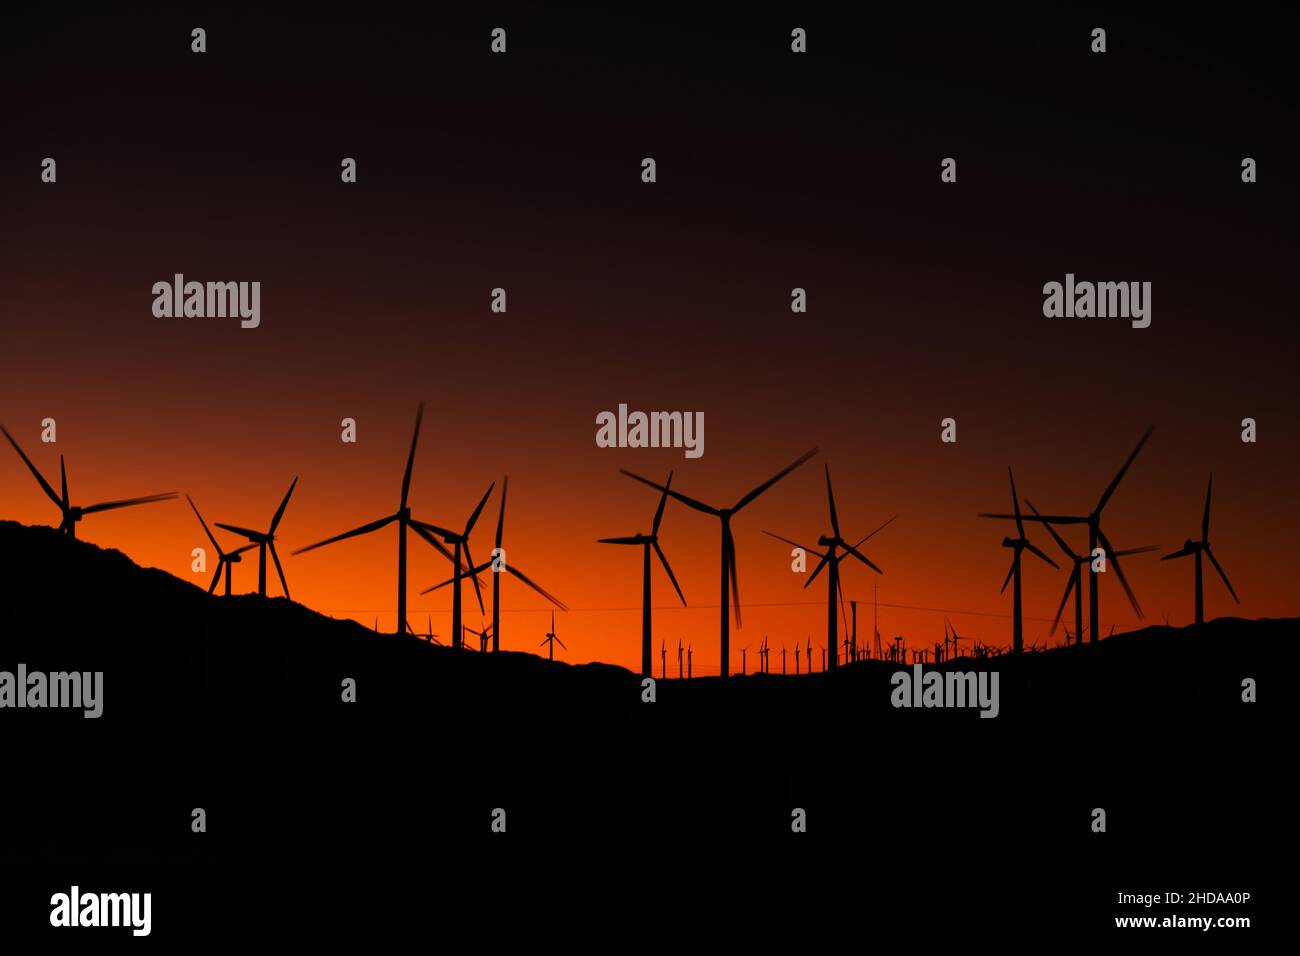 Wind Power Generation Using Wind Energy in Coachella Valley, California. Scenic Sunset. Green Power Industry Theme. Stock Photo